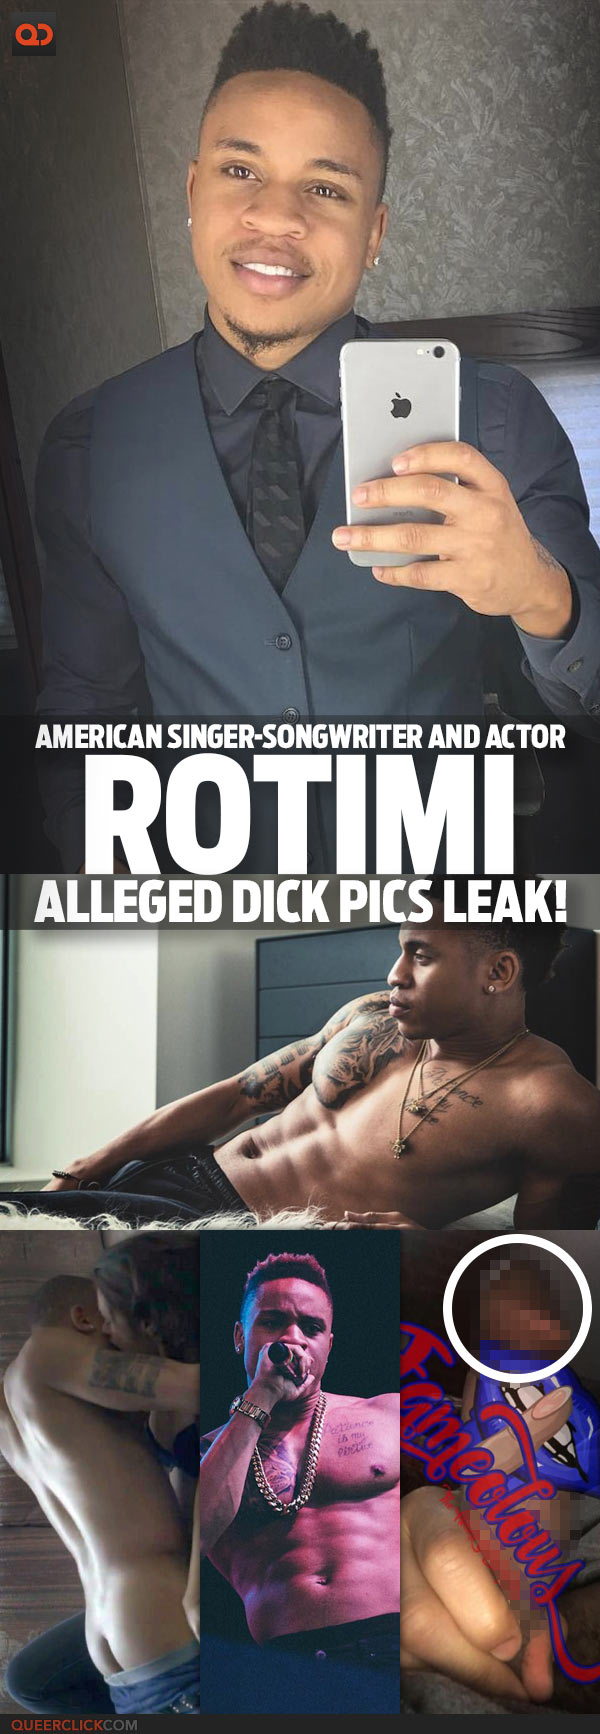 Rotimi, American Singer-Songwriter And Actor, Alleged Dick Pics Leak!